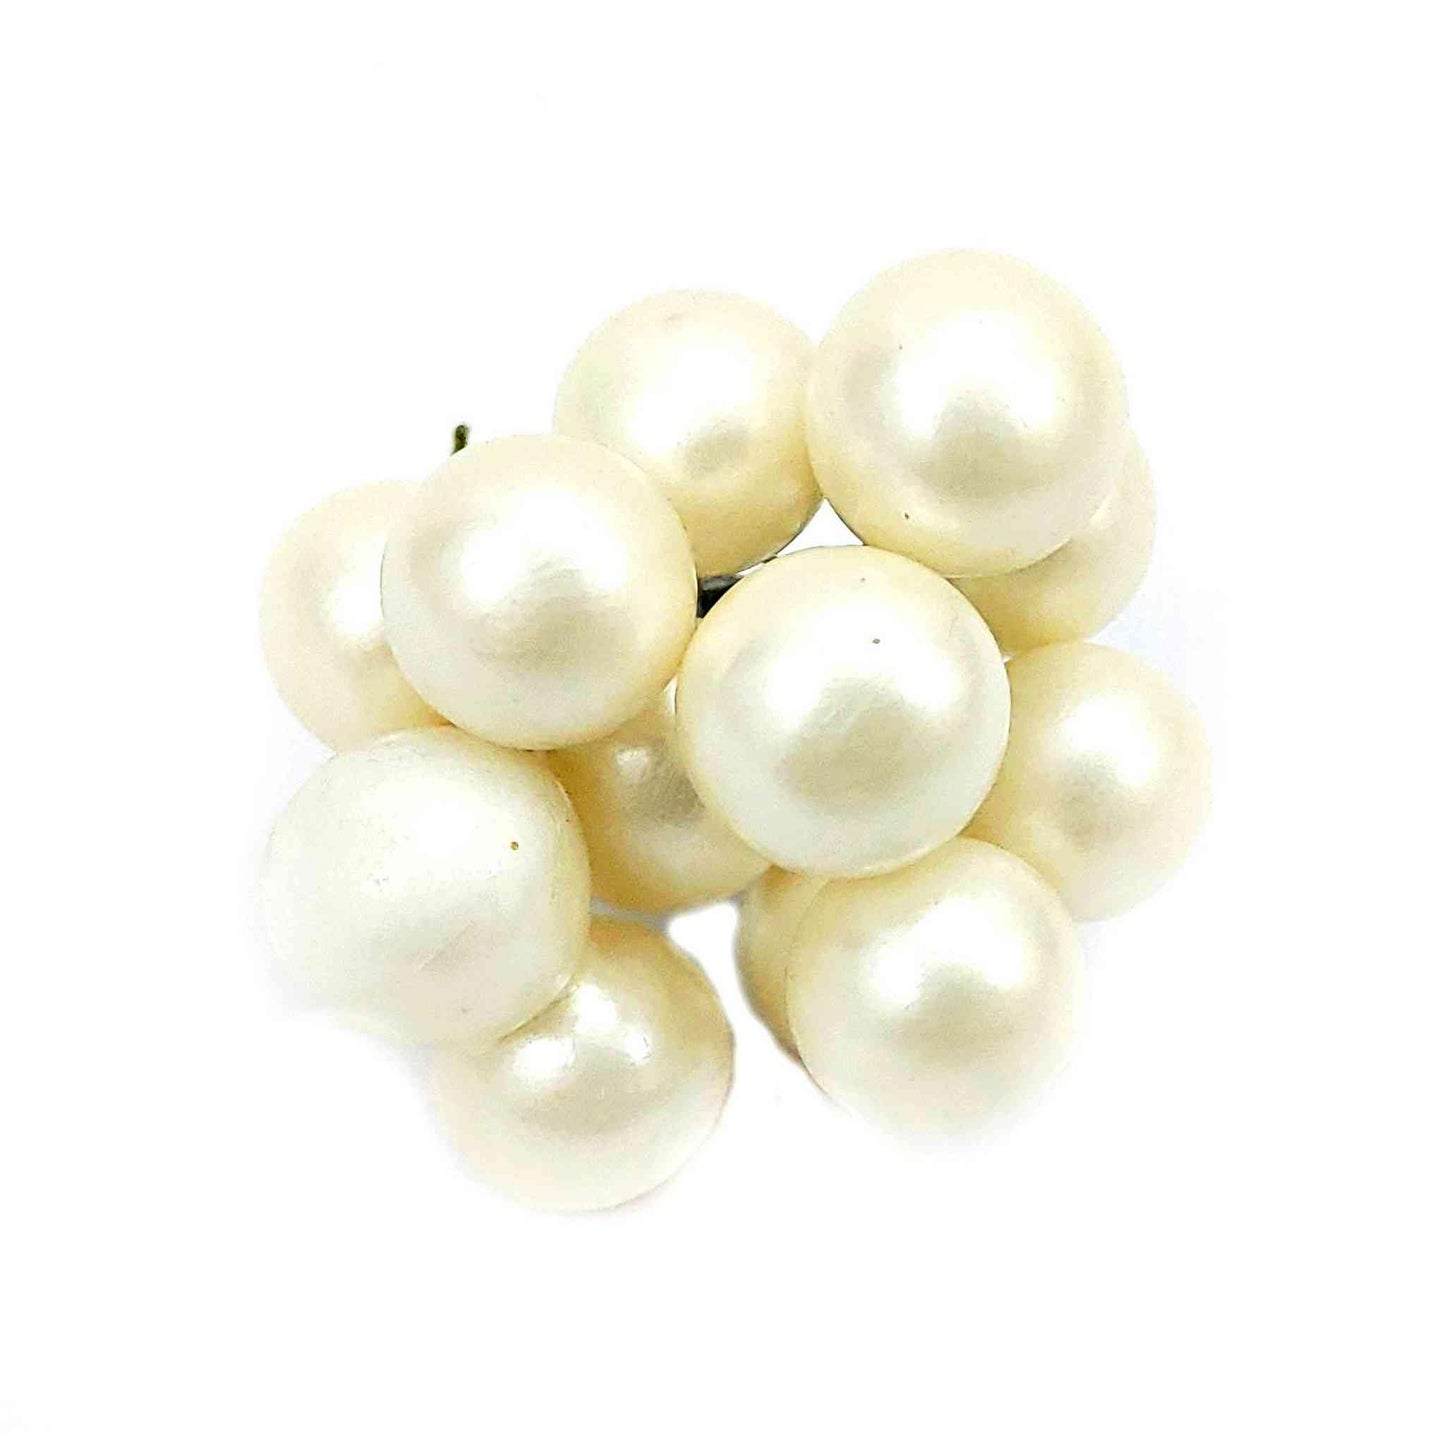 Indian Petals Mettalic finish Pearl Stick for DIY Craft, Trouseau Packing or Decoration (Bunch of 12) - Design 116, Ivory - Indian Petals